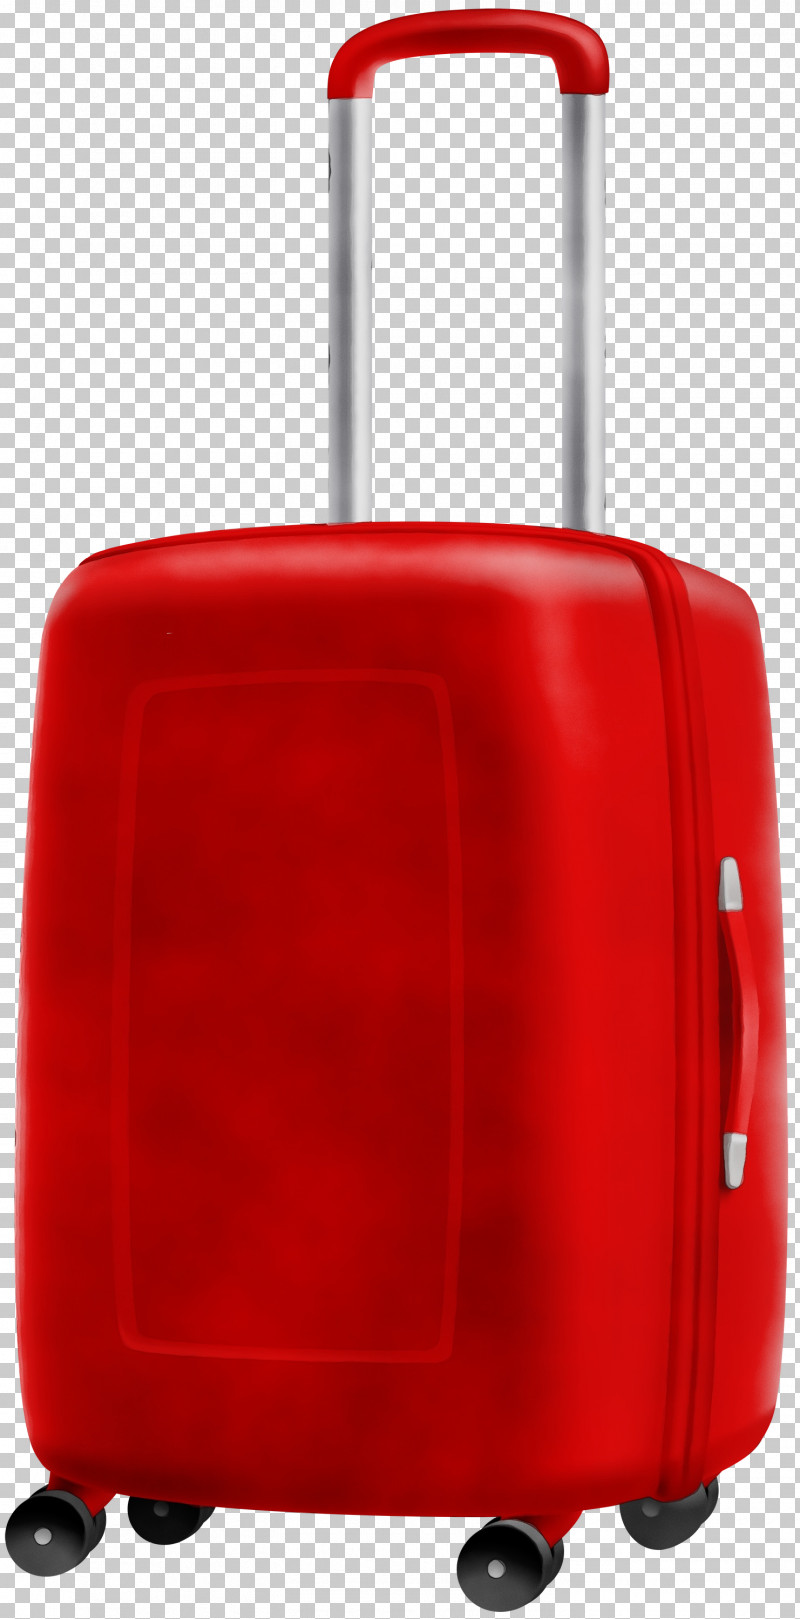 Red Suitcase Hand Luggage Baggage Luggage And Bags PNG, Clipart, Bag, Baggage, Hand Luggage, Luggage And Bags, Paint Free PNG Download